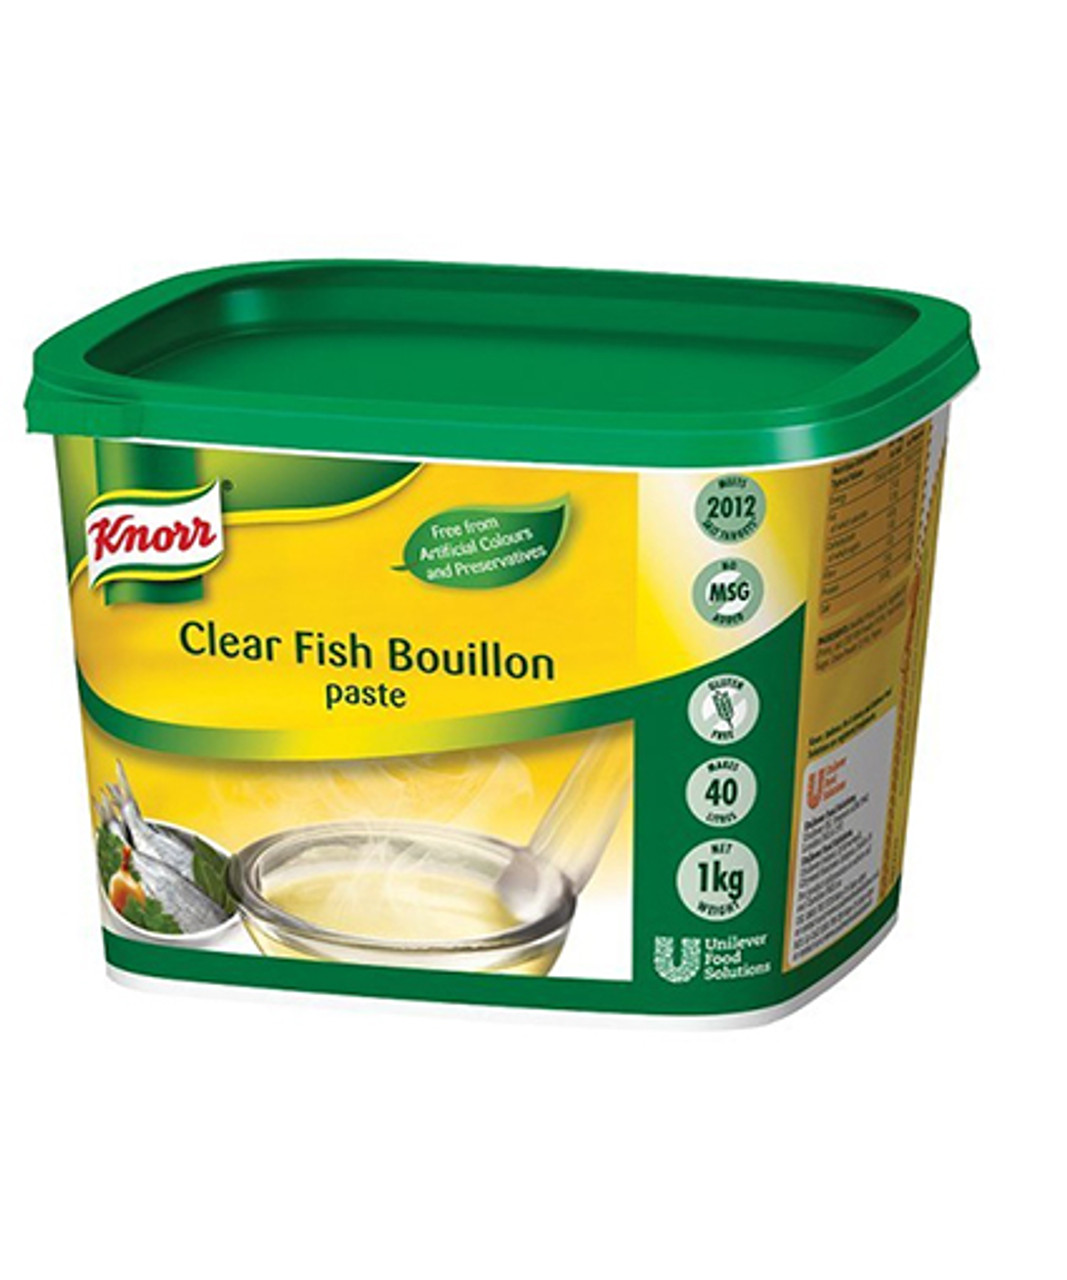 Knorr Professional Bouillon Stock 1Kg Containers - Chicken / Veg / Beef /  Fish